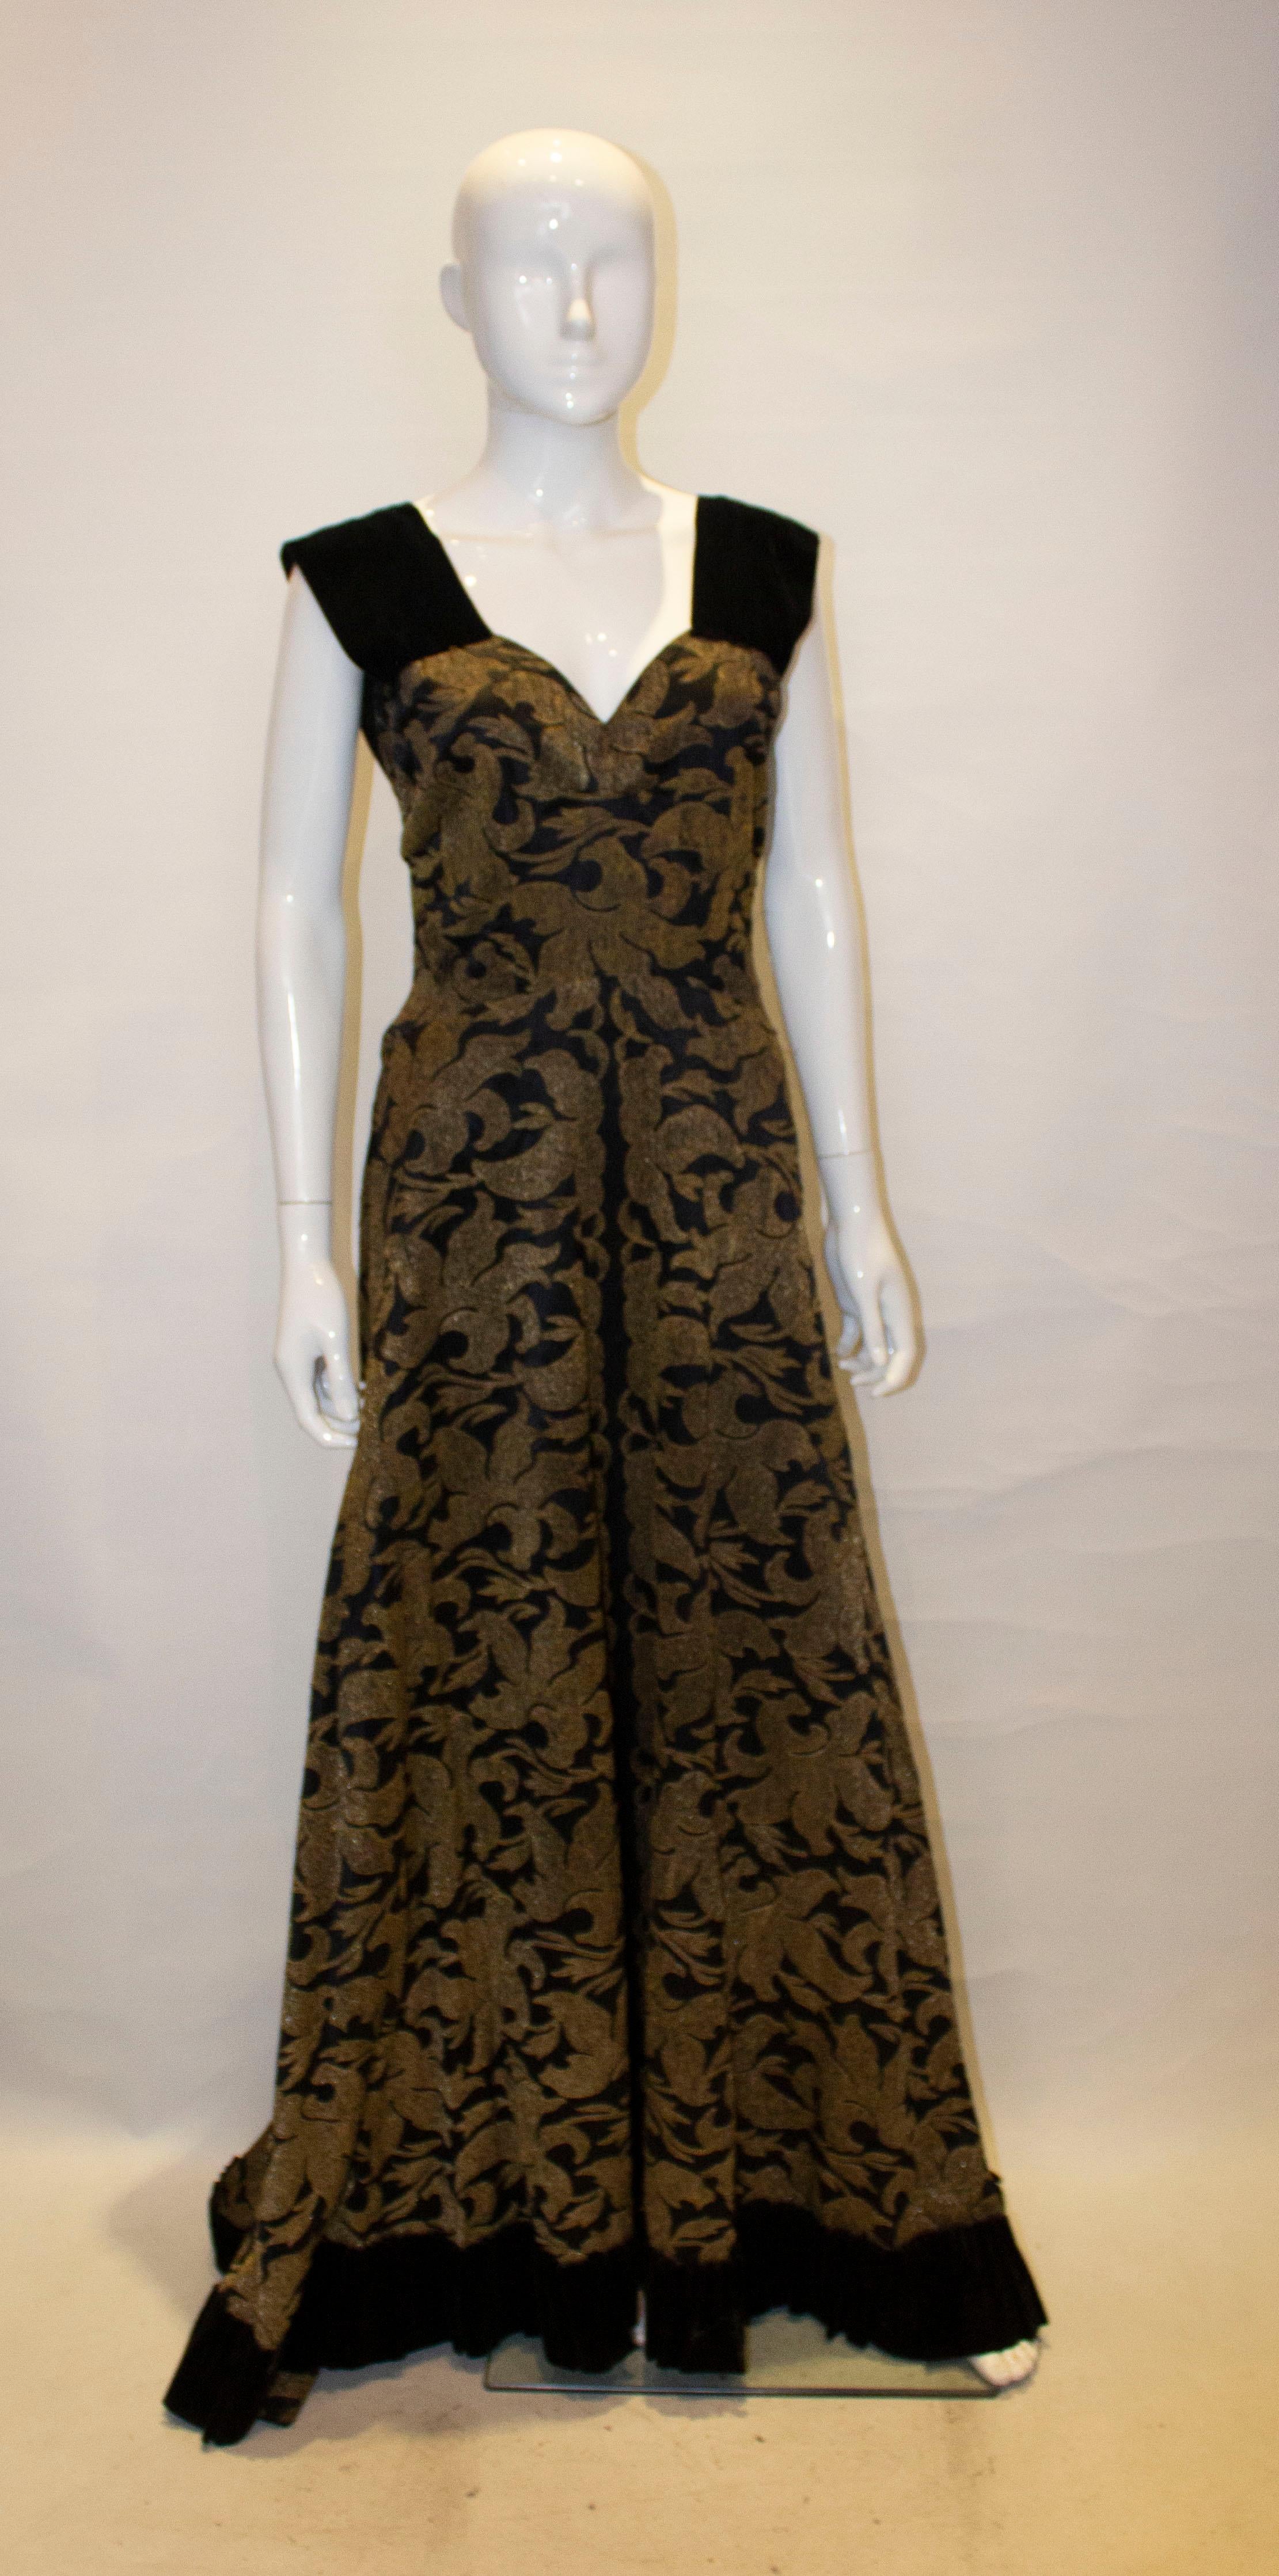 A headturning vintage evning gown in a heavy black and gold fabric with black velvet trim. The dress has black velvet strap and hem and a side zip.